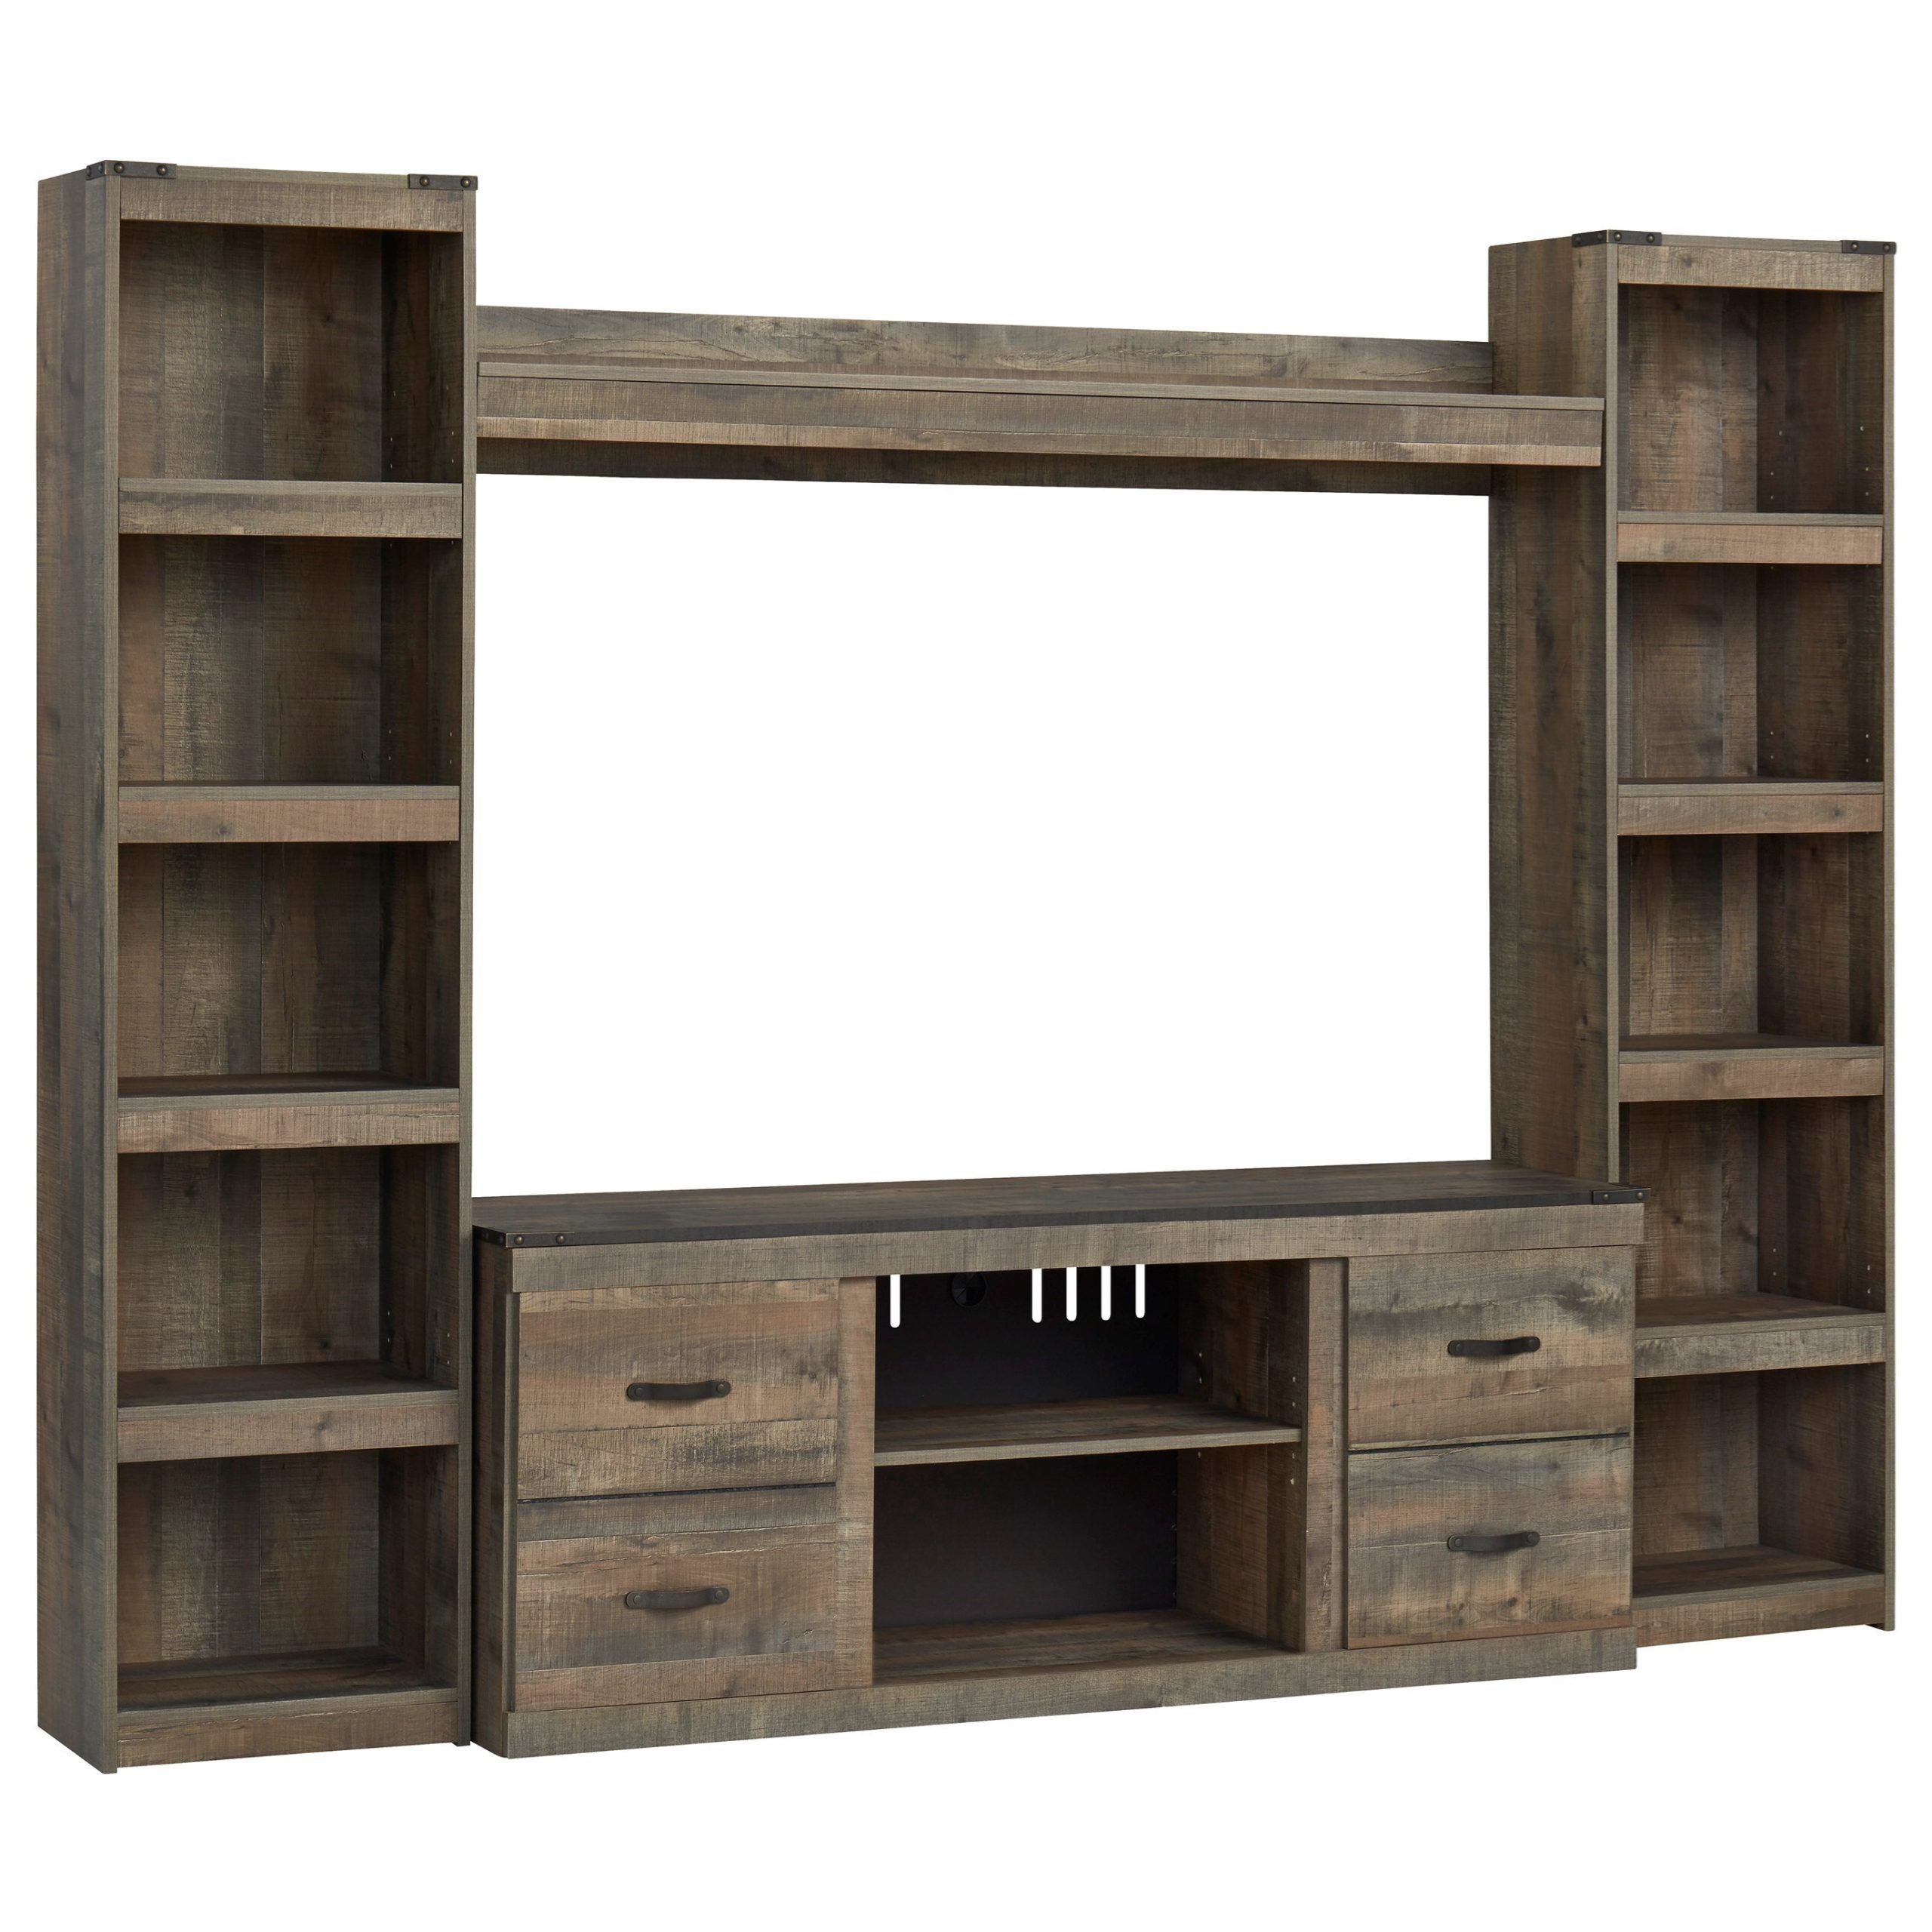 Signature Designashley Trinell Entertainment Wall Unit W/ Piers And For Entertainment Units With Bridge (Gallery 13 of 20)